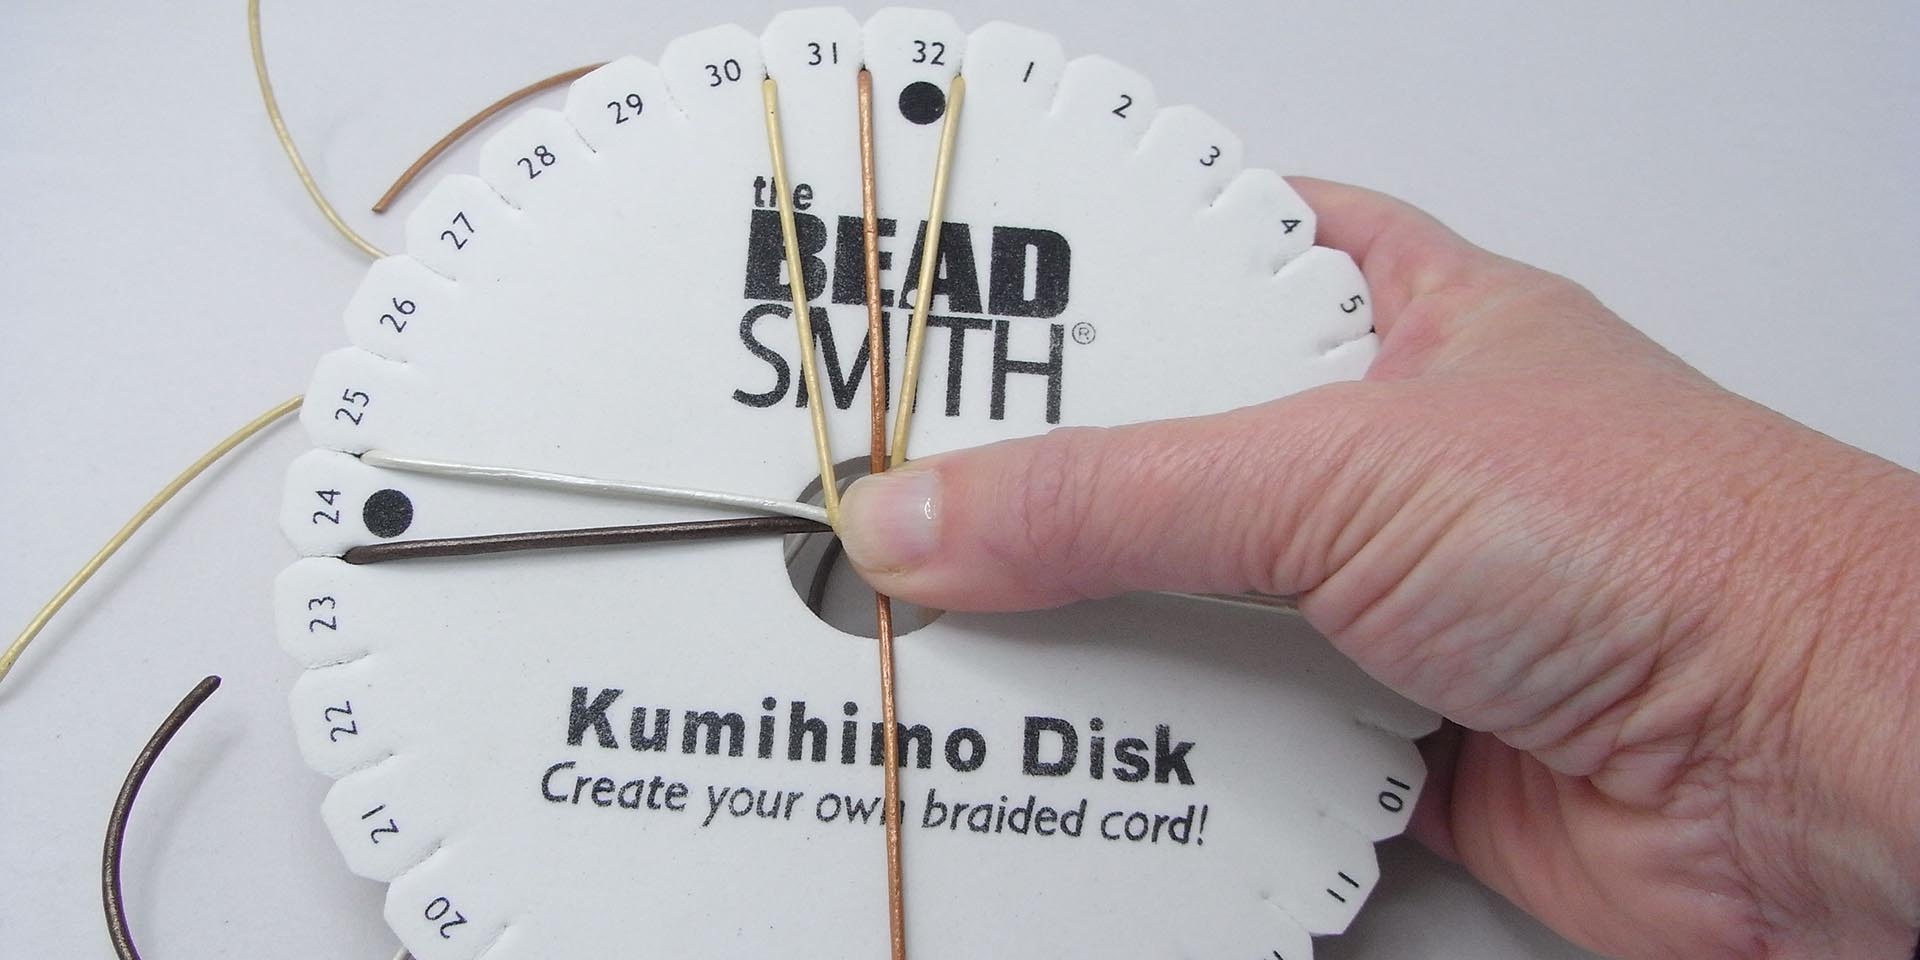 braid the leather cord on a Kumihimo disk